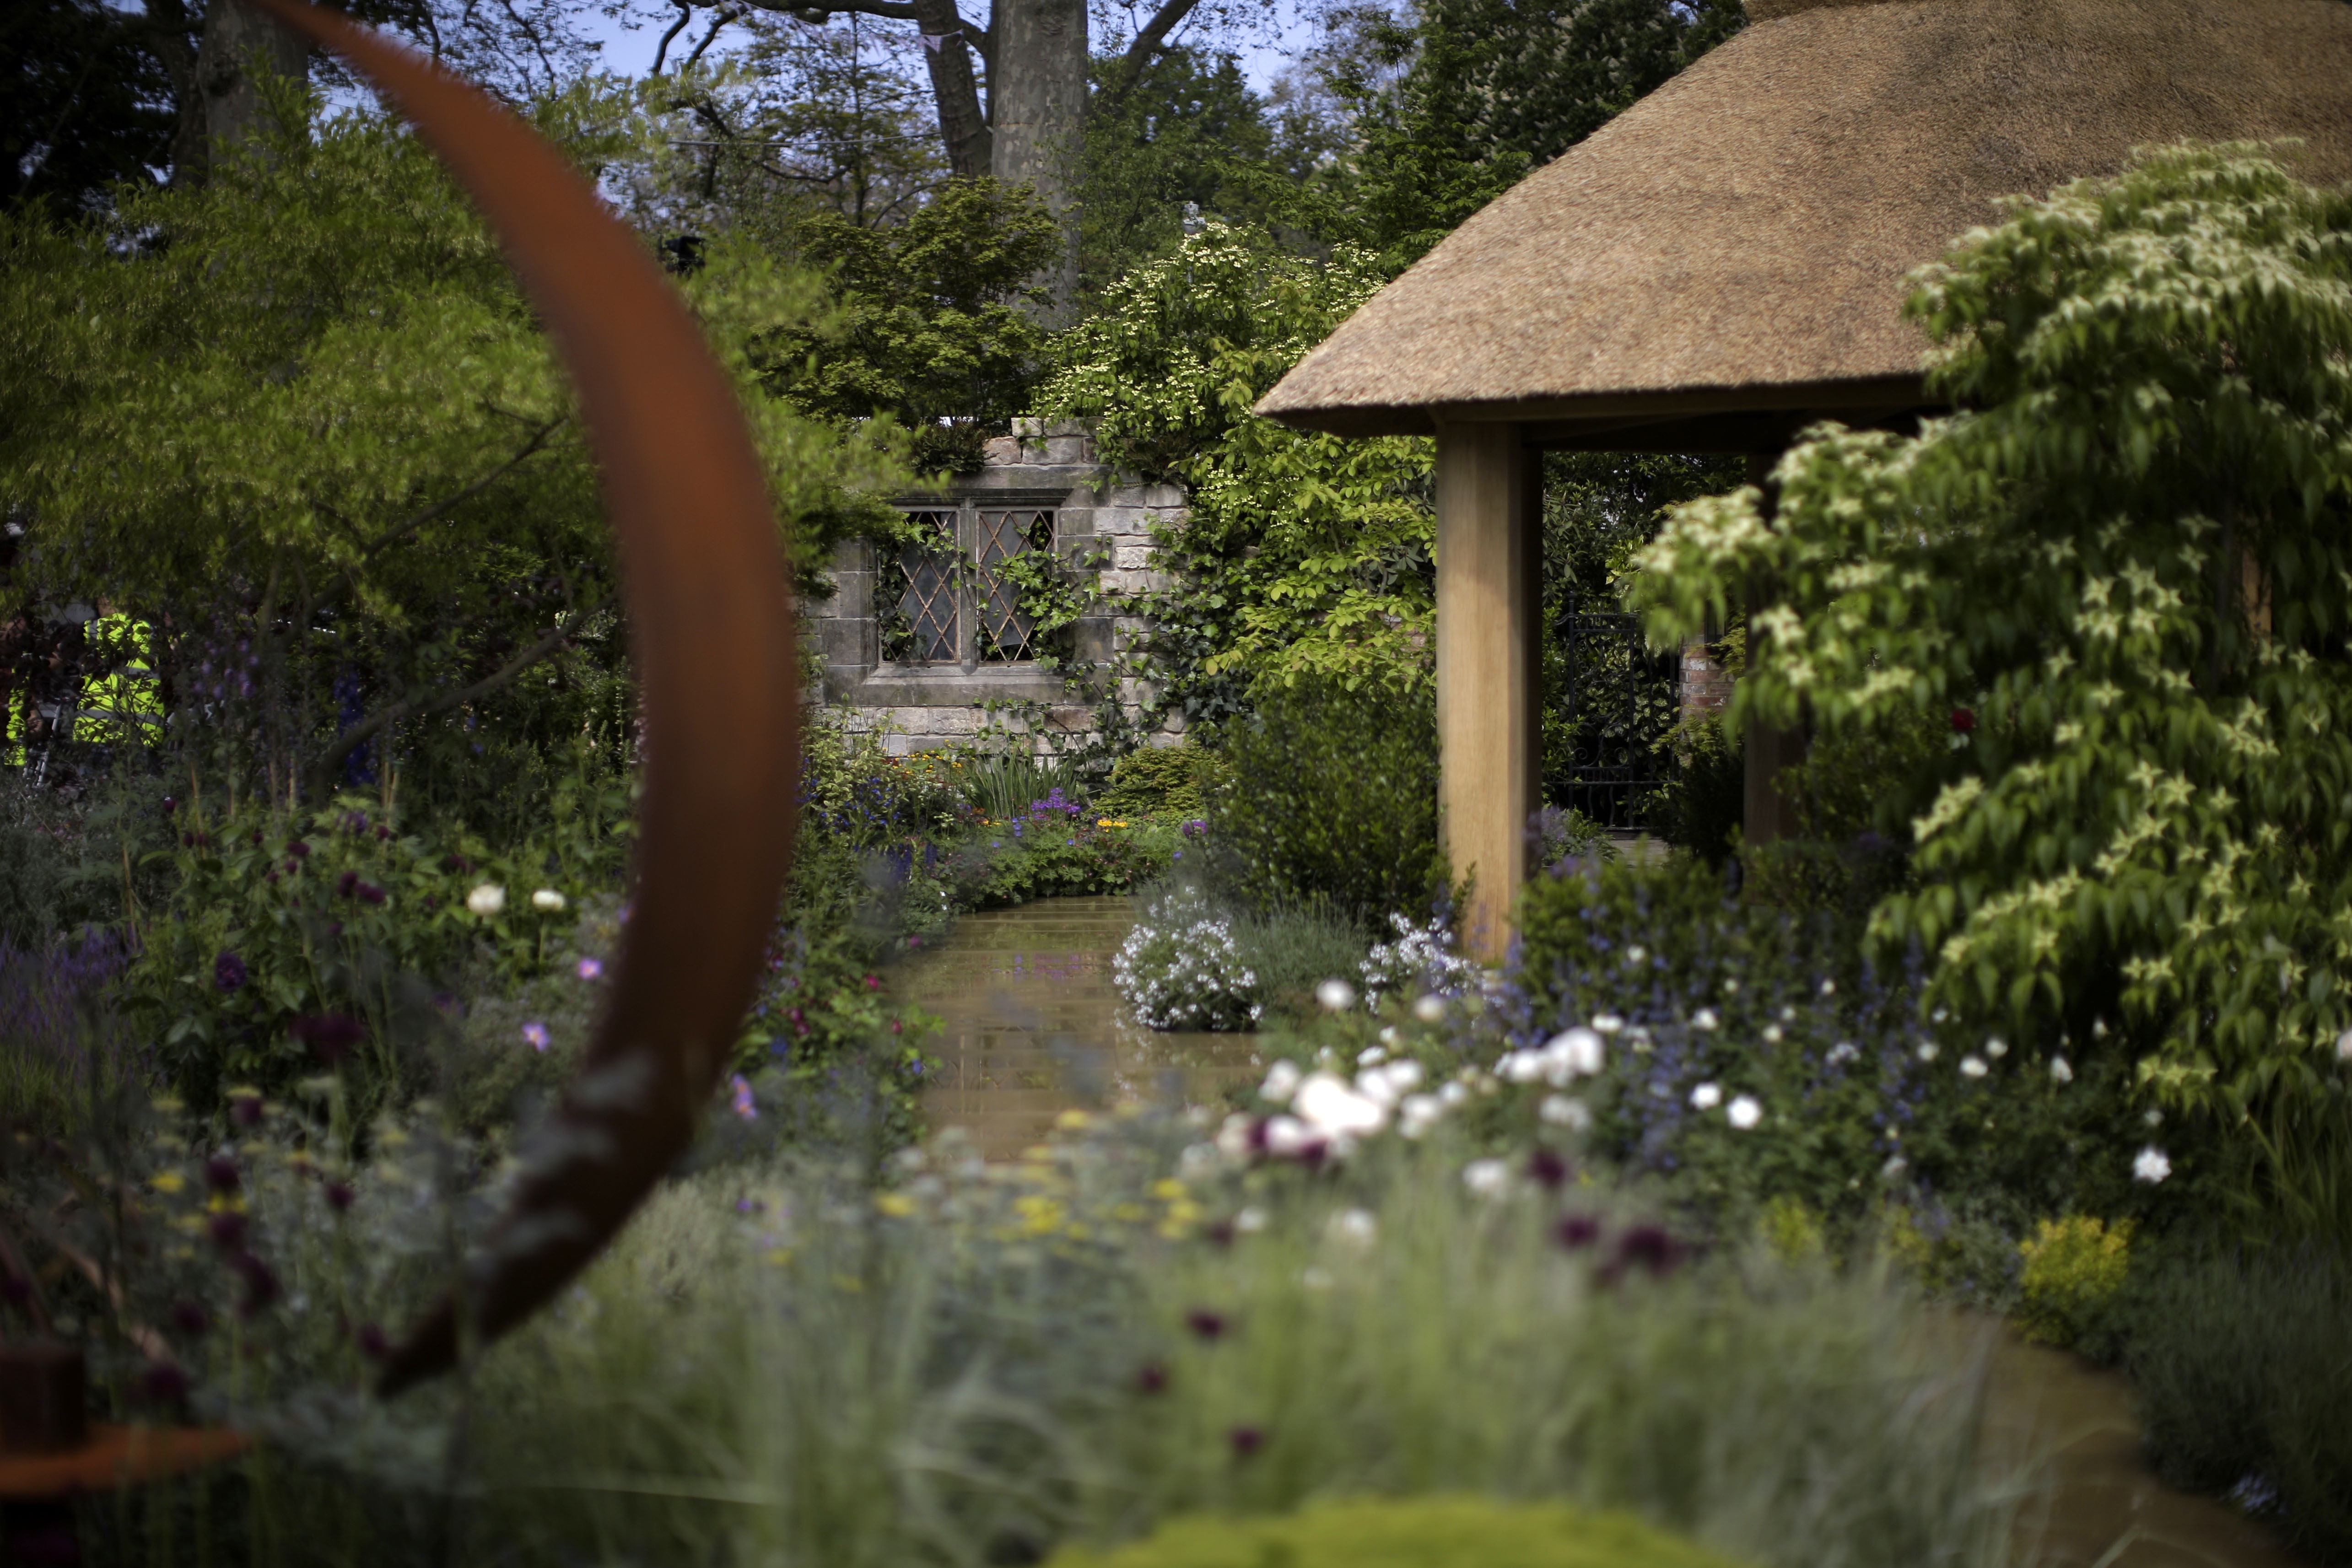 The M&G Garden designed by Roger Platts at The Chelsea Flower Show 2013 which won Gold Medal